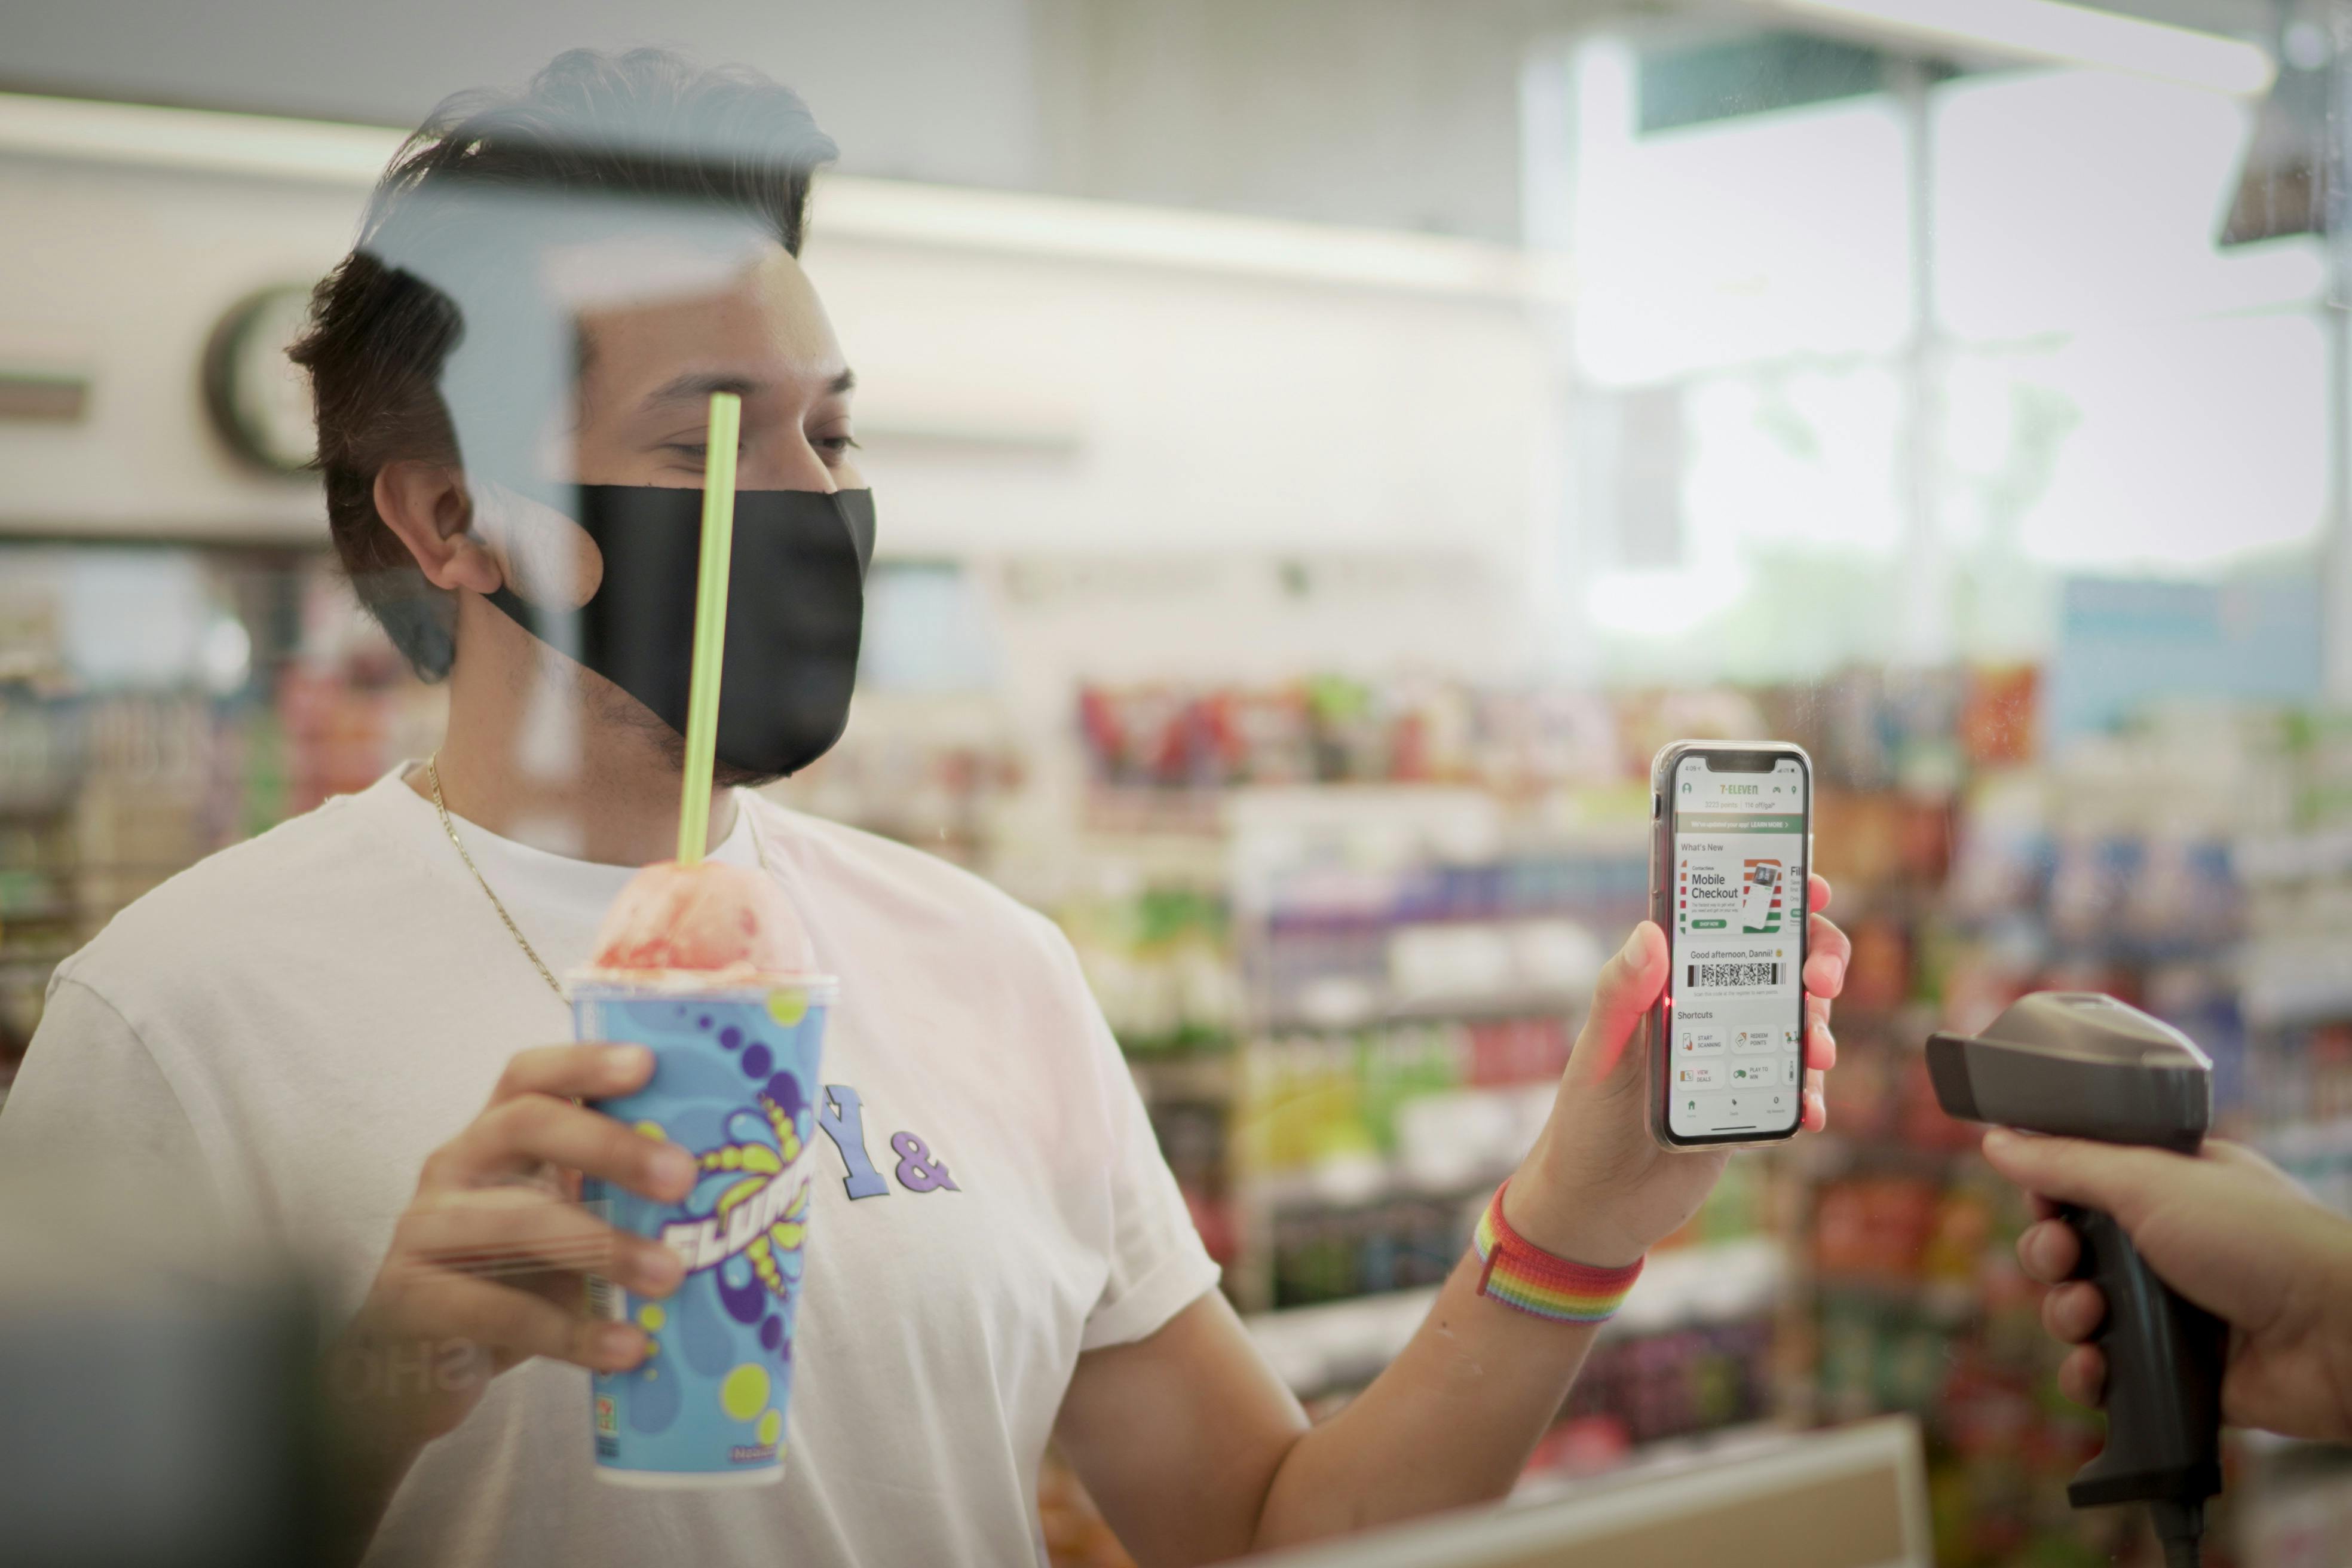 A person holding a slurpee and their phone displaying a coupon for a free slurpee to be scanned by a 7/11 employee at checkout.